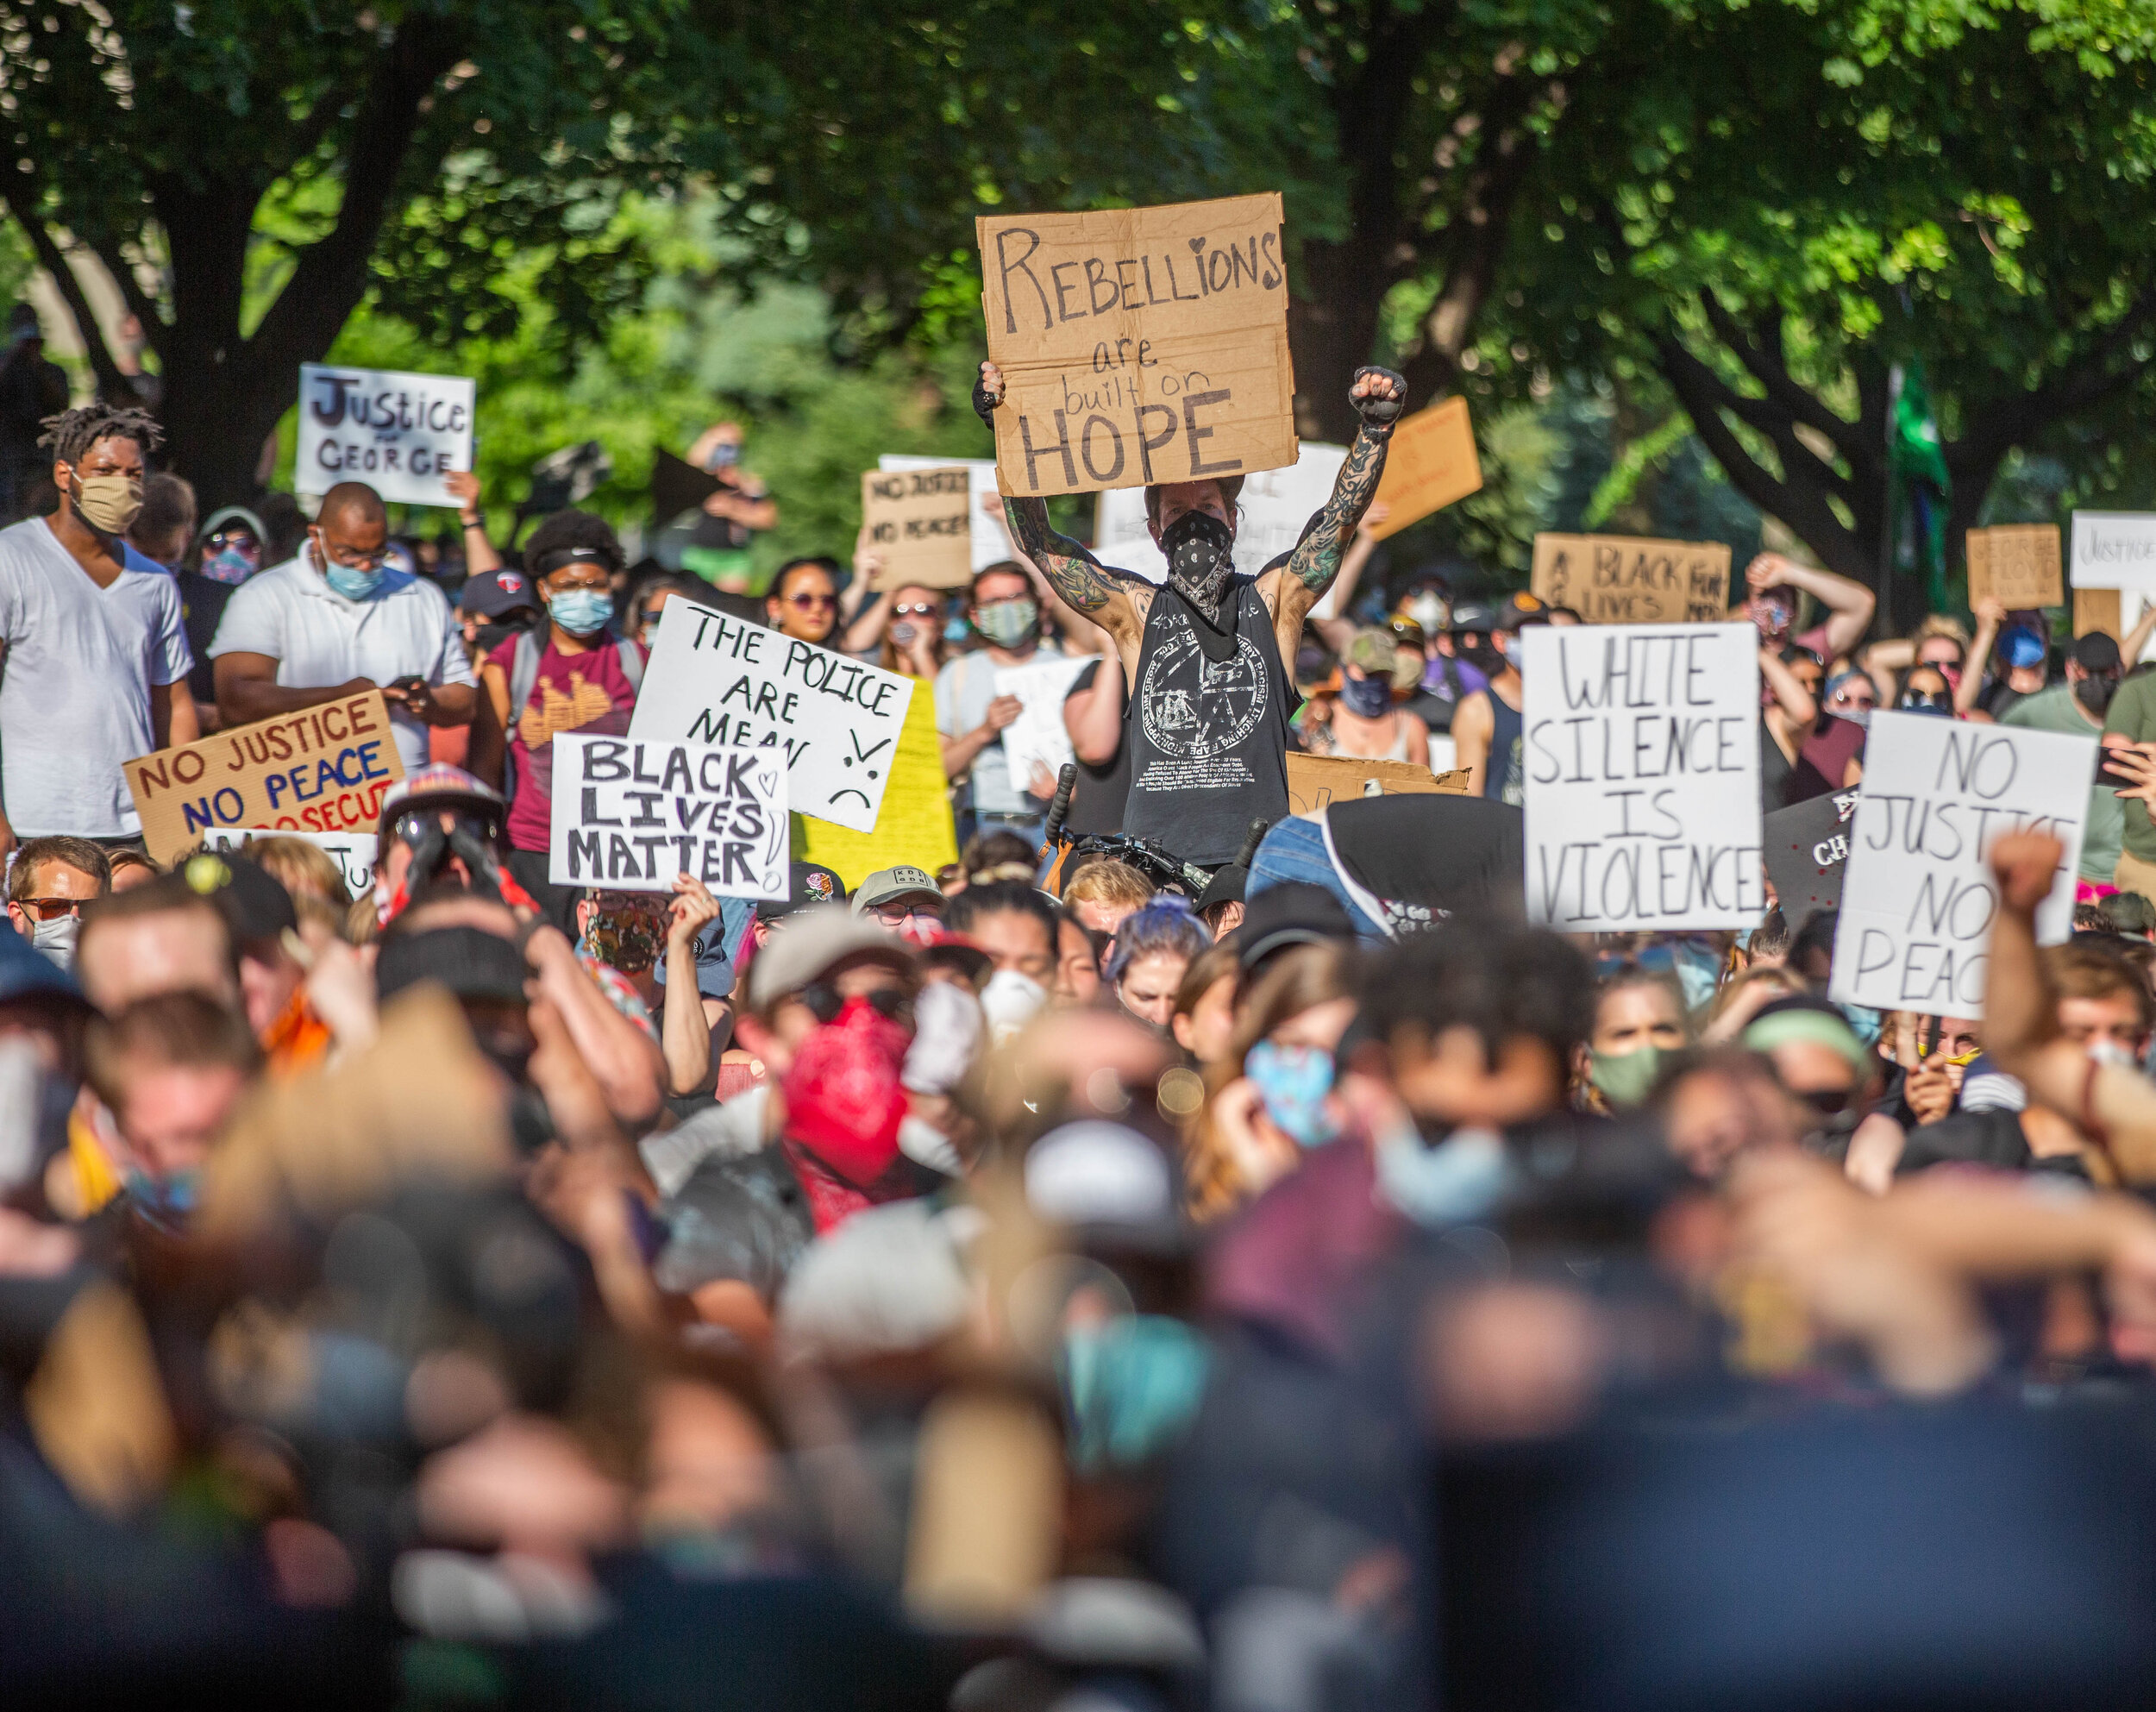  Protesters listen and hold signs up as speakers at a protest in front of the Governors Mansion speak in Saint Paul, MN over the police killing of George Floyd on June 1, 2020. Chris Juhn/Zenger 